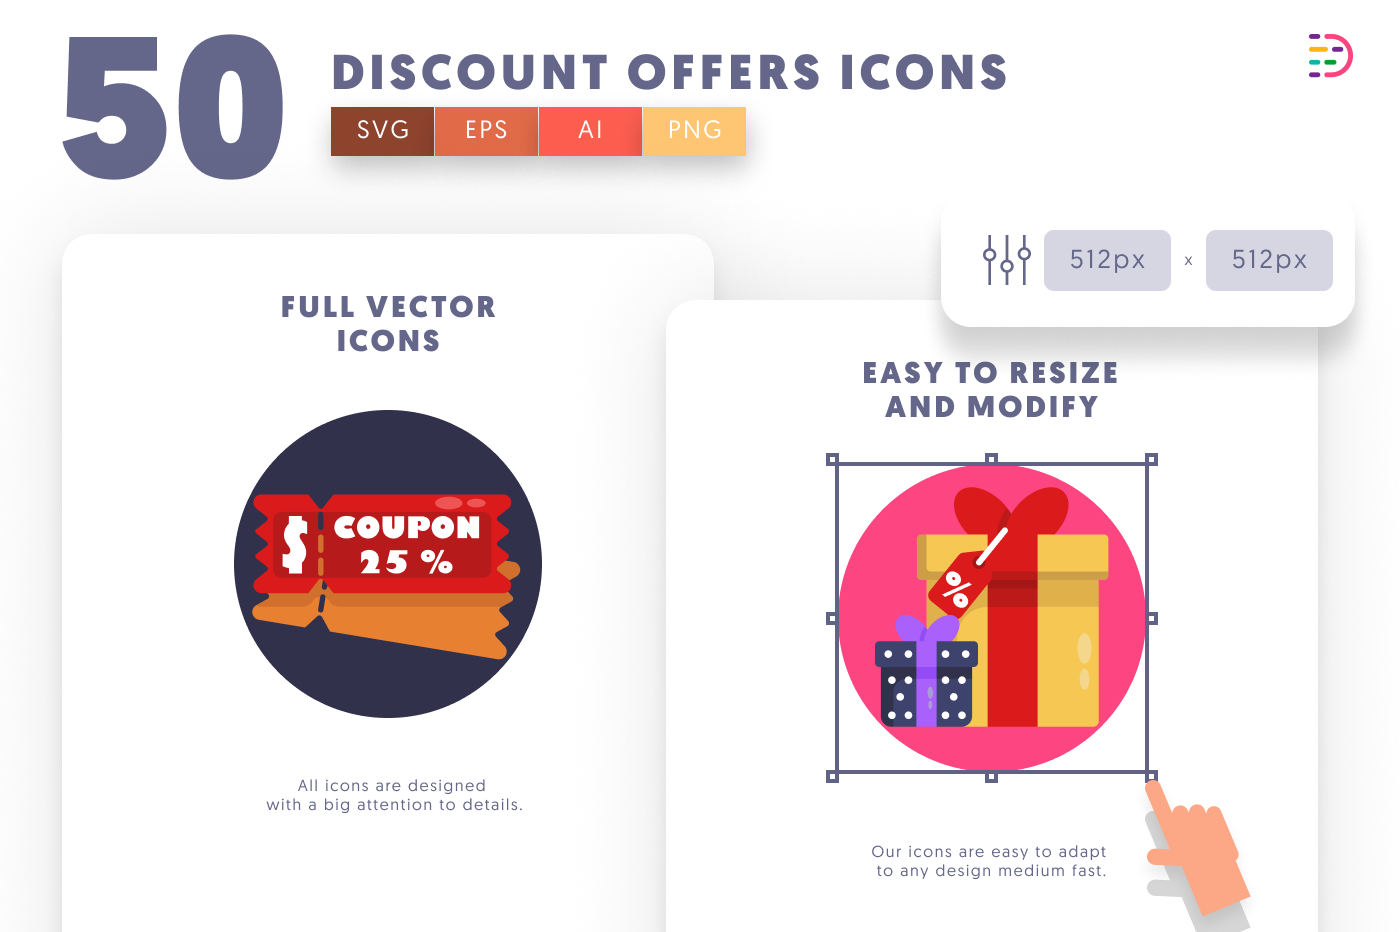 Attract attention with our Discount and Sales Offers Icons pack for social media, email, and web promotions